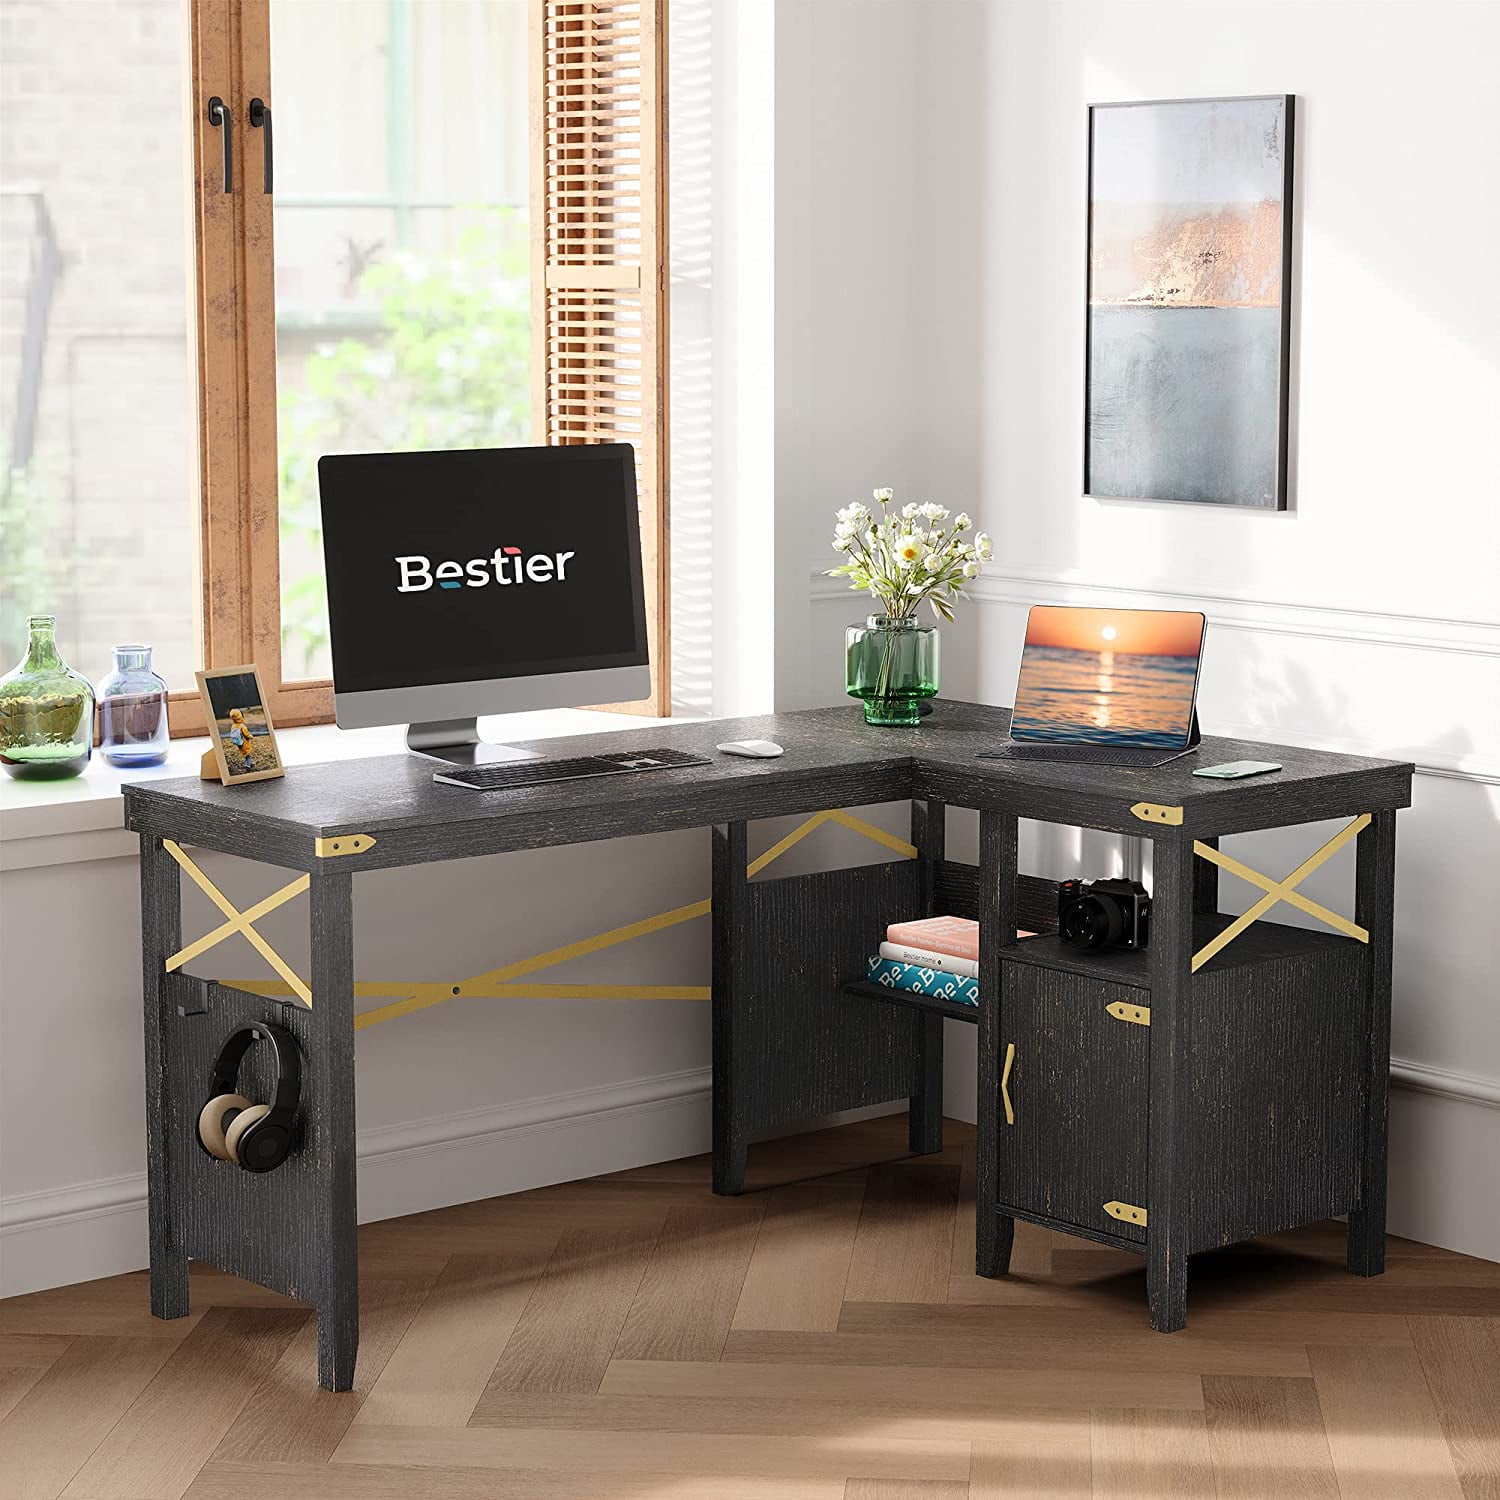 Bestier Farmhouse L-Shaped Computer Desk with Storage Cabinet (15.2'' W x 18.4'' D x 15.6'' H, Black and Gold)